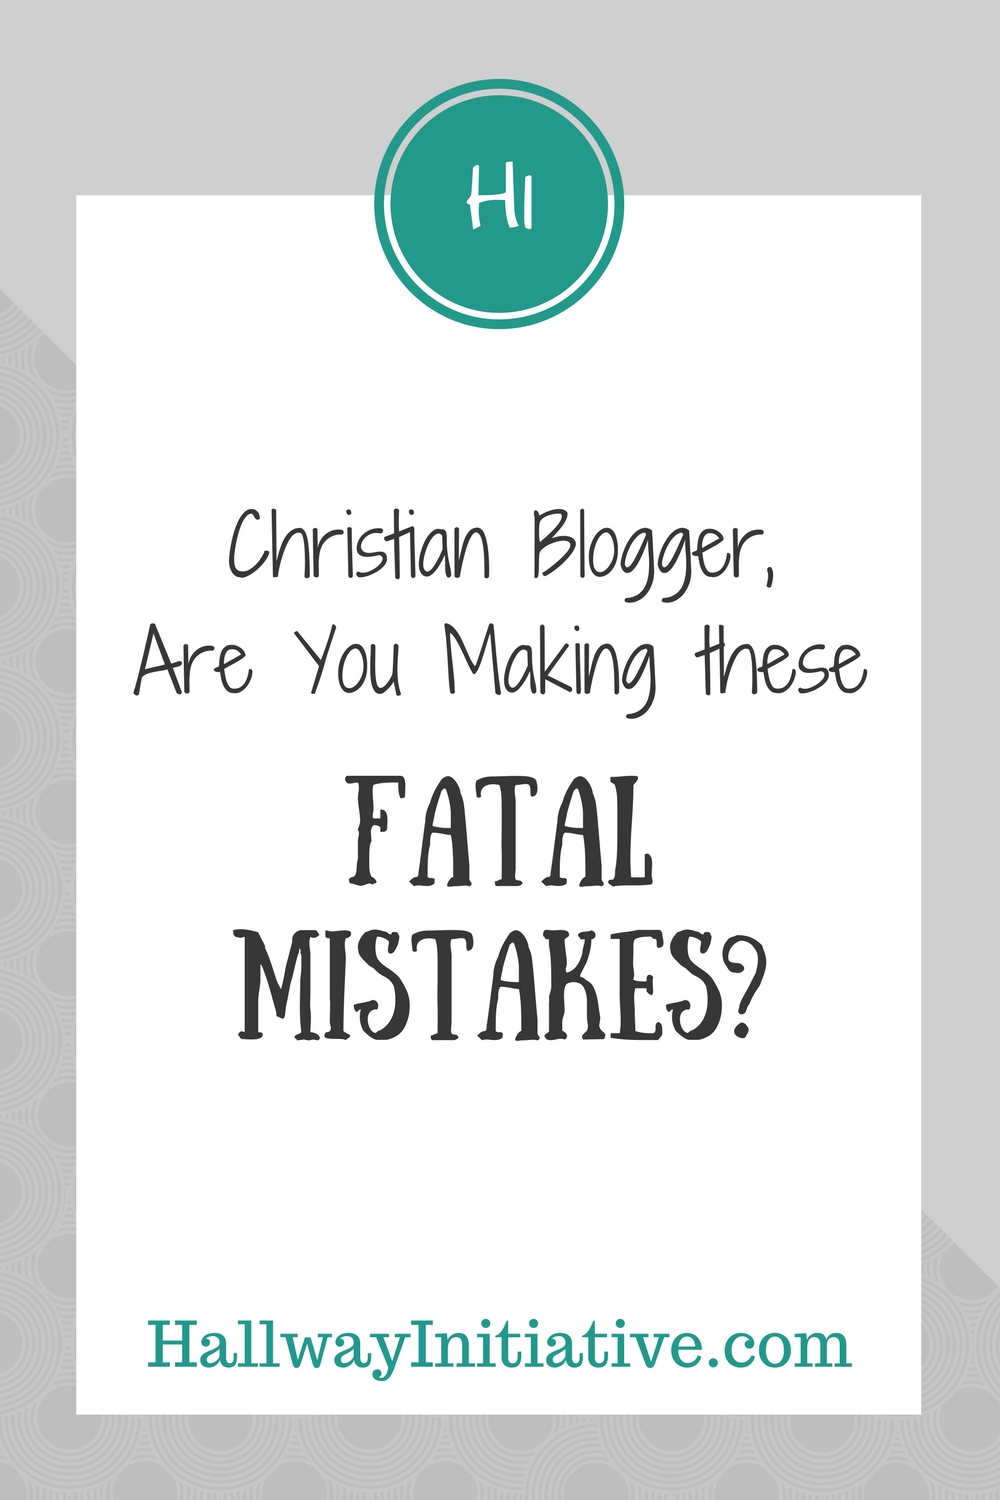 Christian blogger, are you making these fatal mistakes?